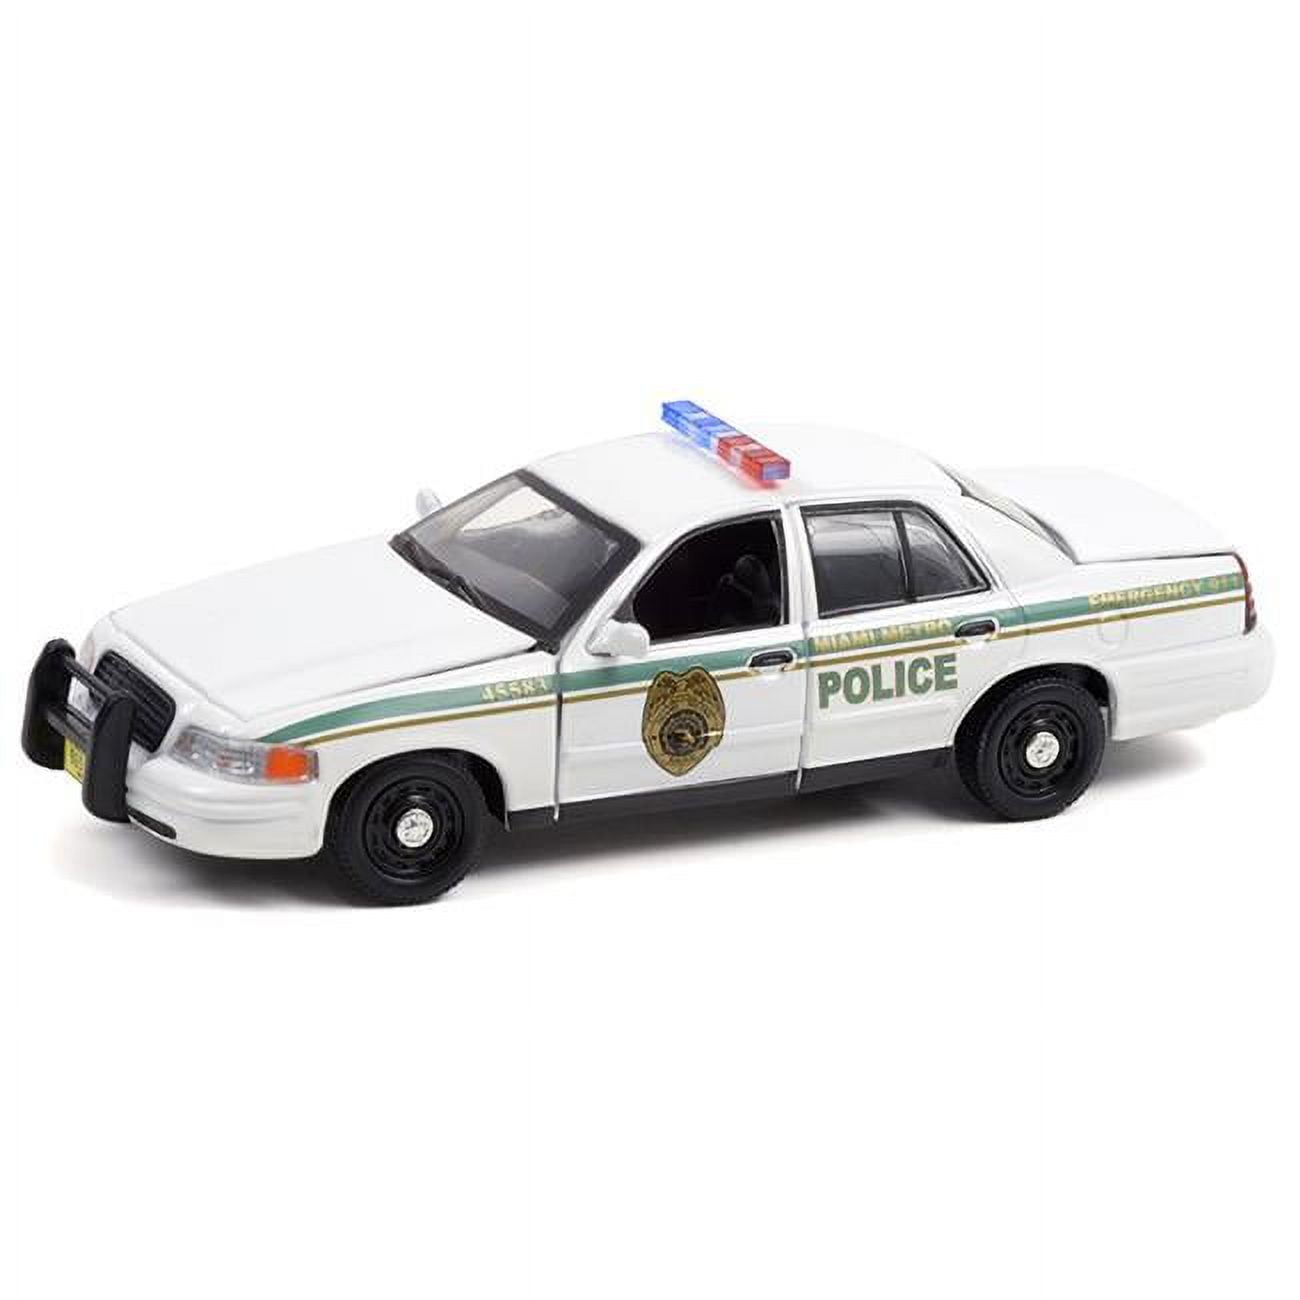 GRE86613 1 by 43 Miami Metro Police Department - 2001 Ford Crown Victoria Police Interceptor Dexter 2006-13 TV Series Die-Cast Model Car, White -  GreenLight